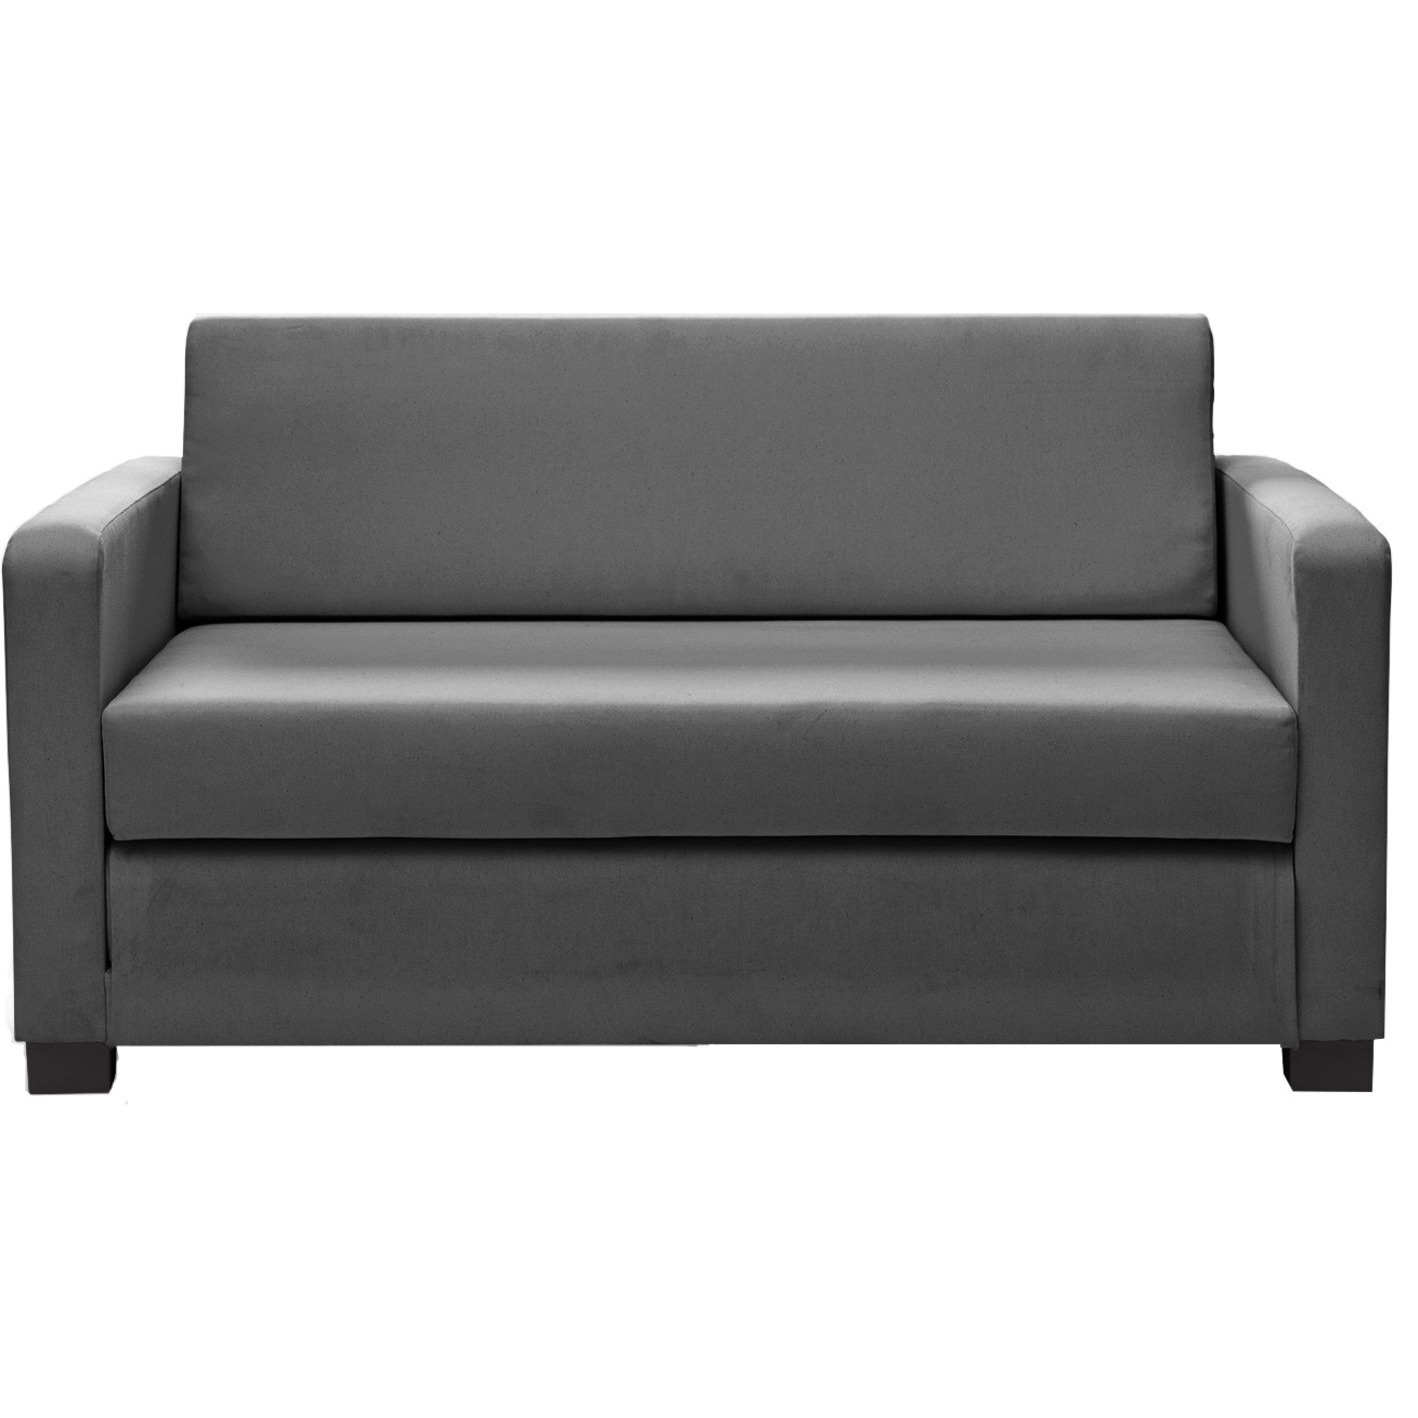 Argos Home Lucy 2 Seater Fabric Sofa Bed - Charcoal